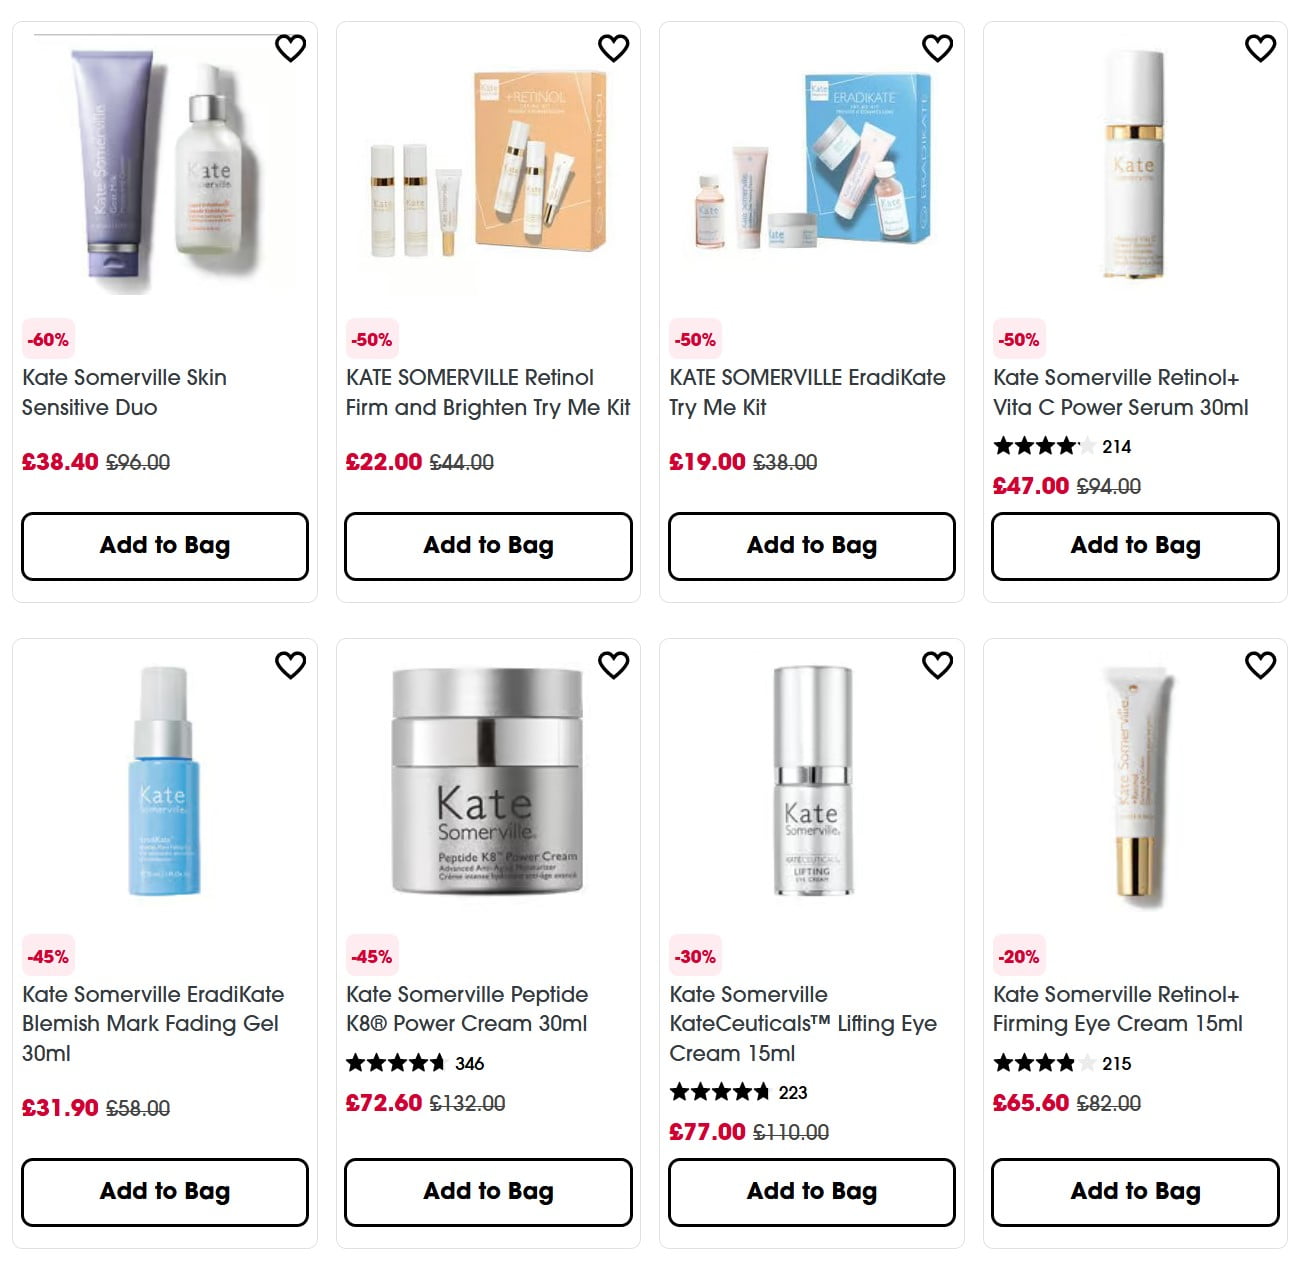 Up to 60% off Kate Somerville at Sephora UK